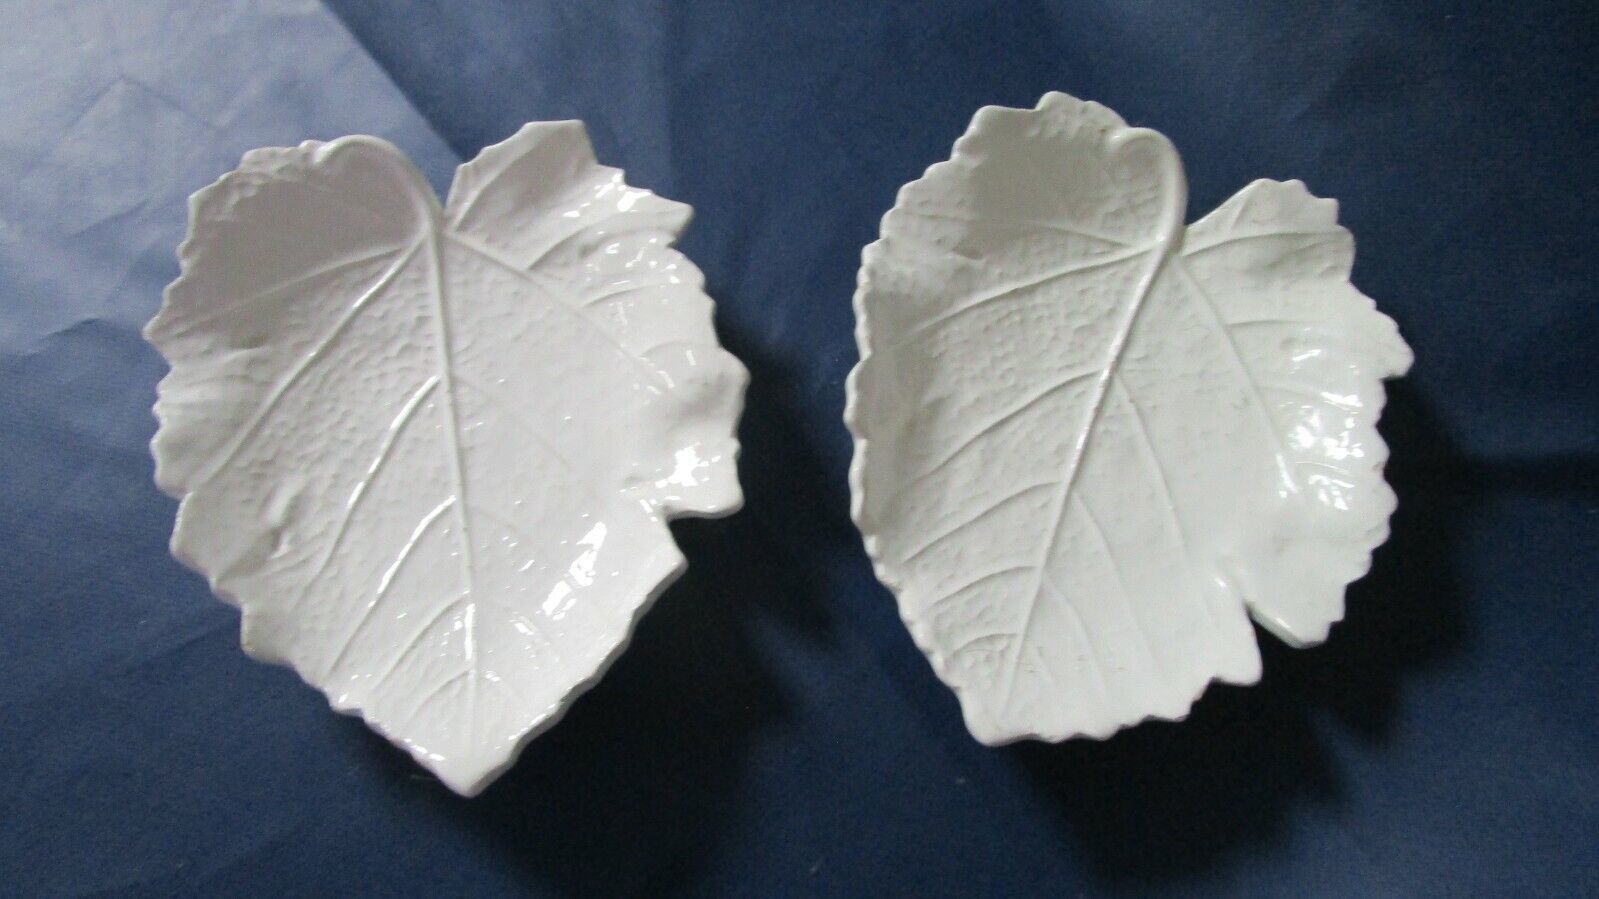 Primary image for COSTA POTTERY ITALY PAIR OF DISHES LEAF SHAPED 7"